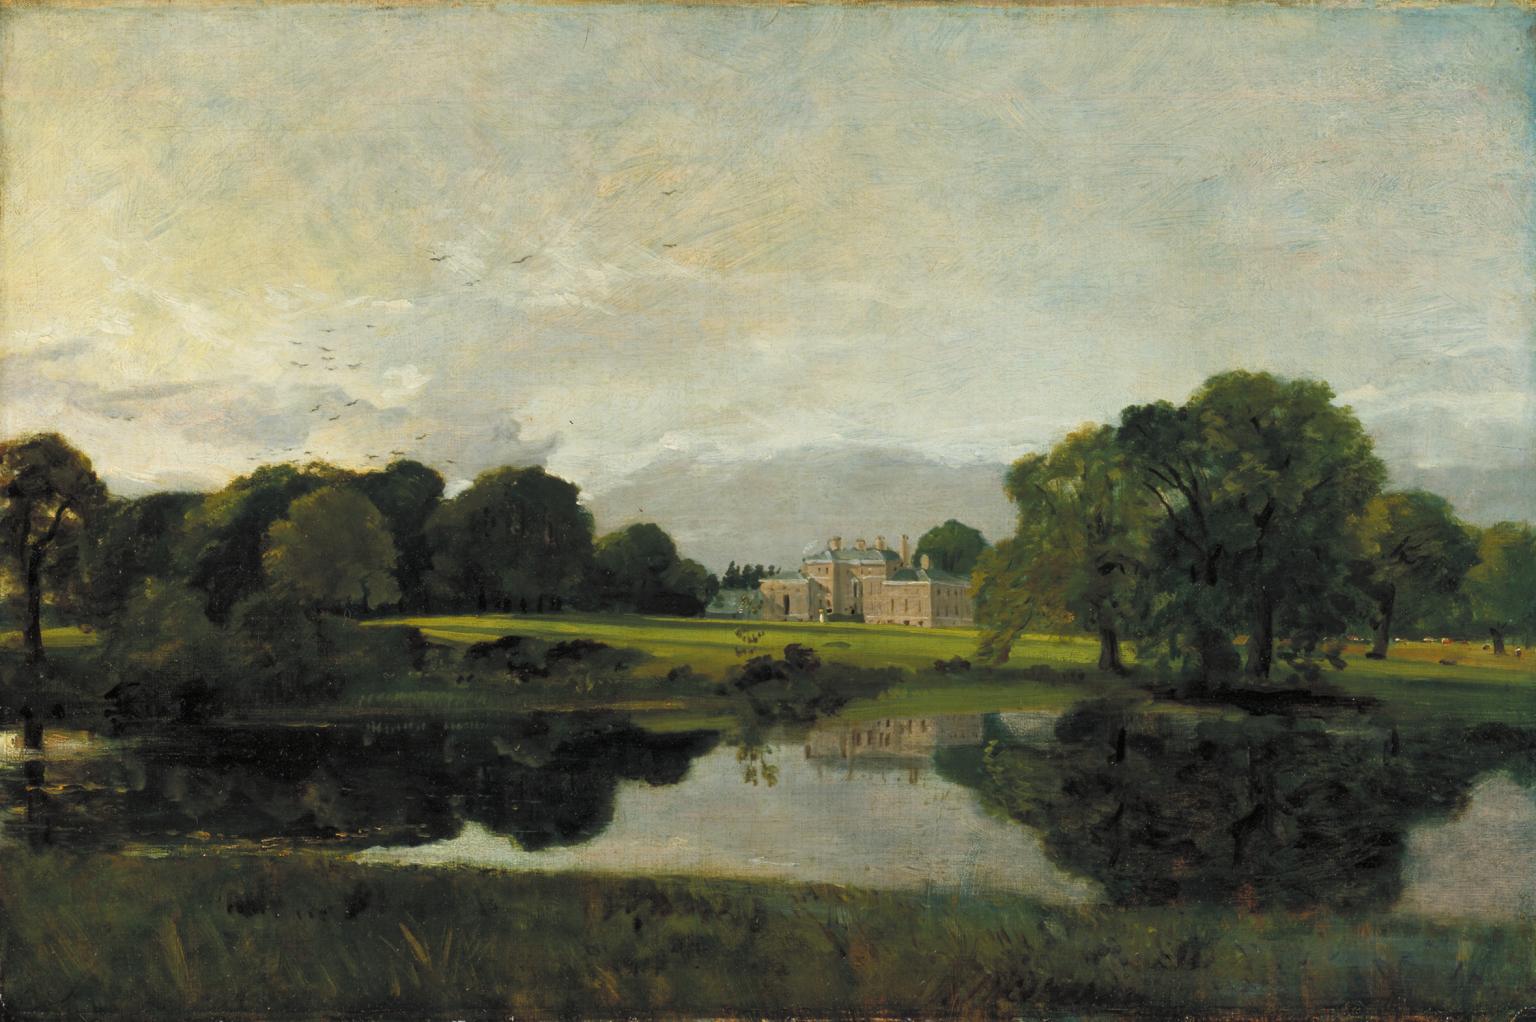 Spencer Alley: Constable's Landscapes of Sensibility at Tate Britain